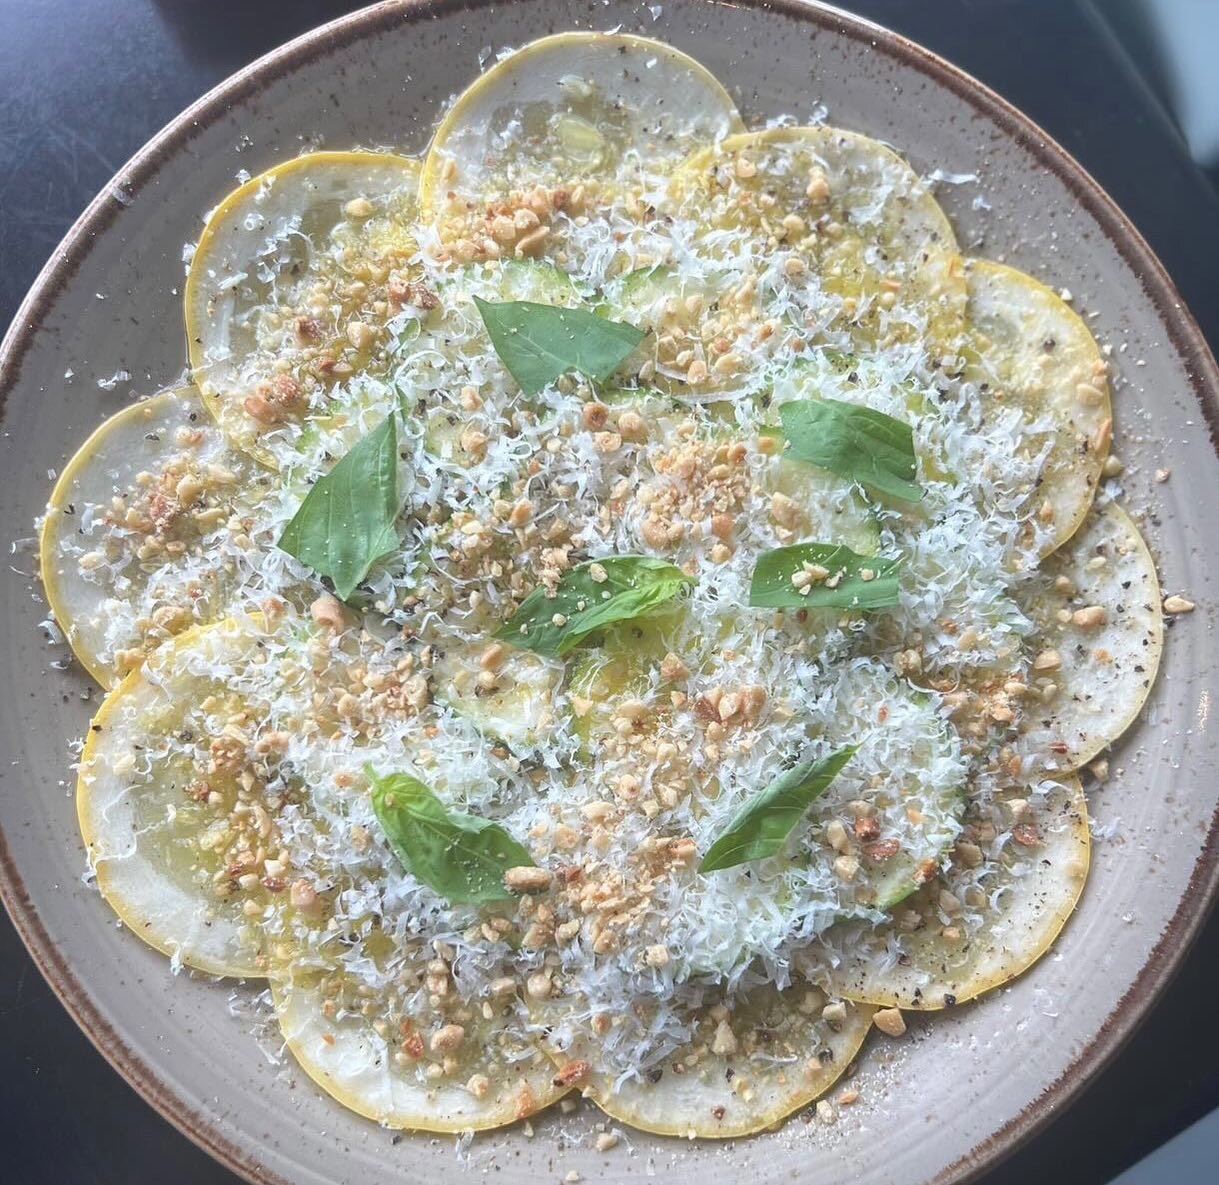 Summer squash carpaccio #recipe from Chef Jonathan Brooks @thebeastgodforgot of @beholderindy 

&ldquo;Love this simple, healthy raw preparation of squash. The texture is unctuous and it feels indulgent while being extremely quick to throw together w